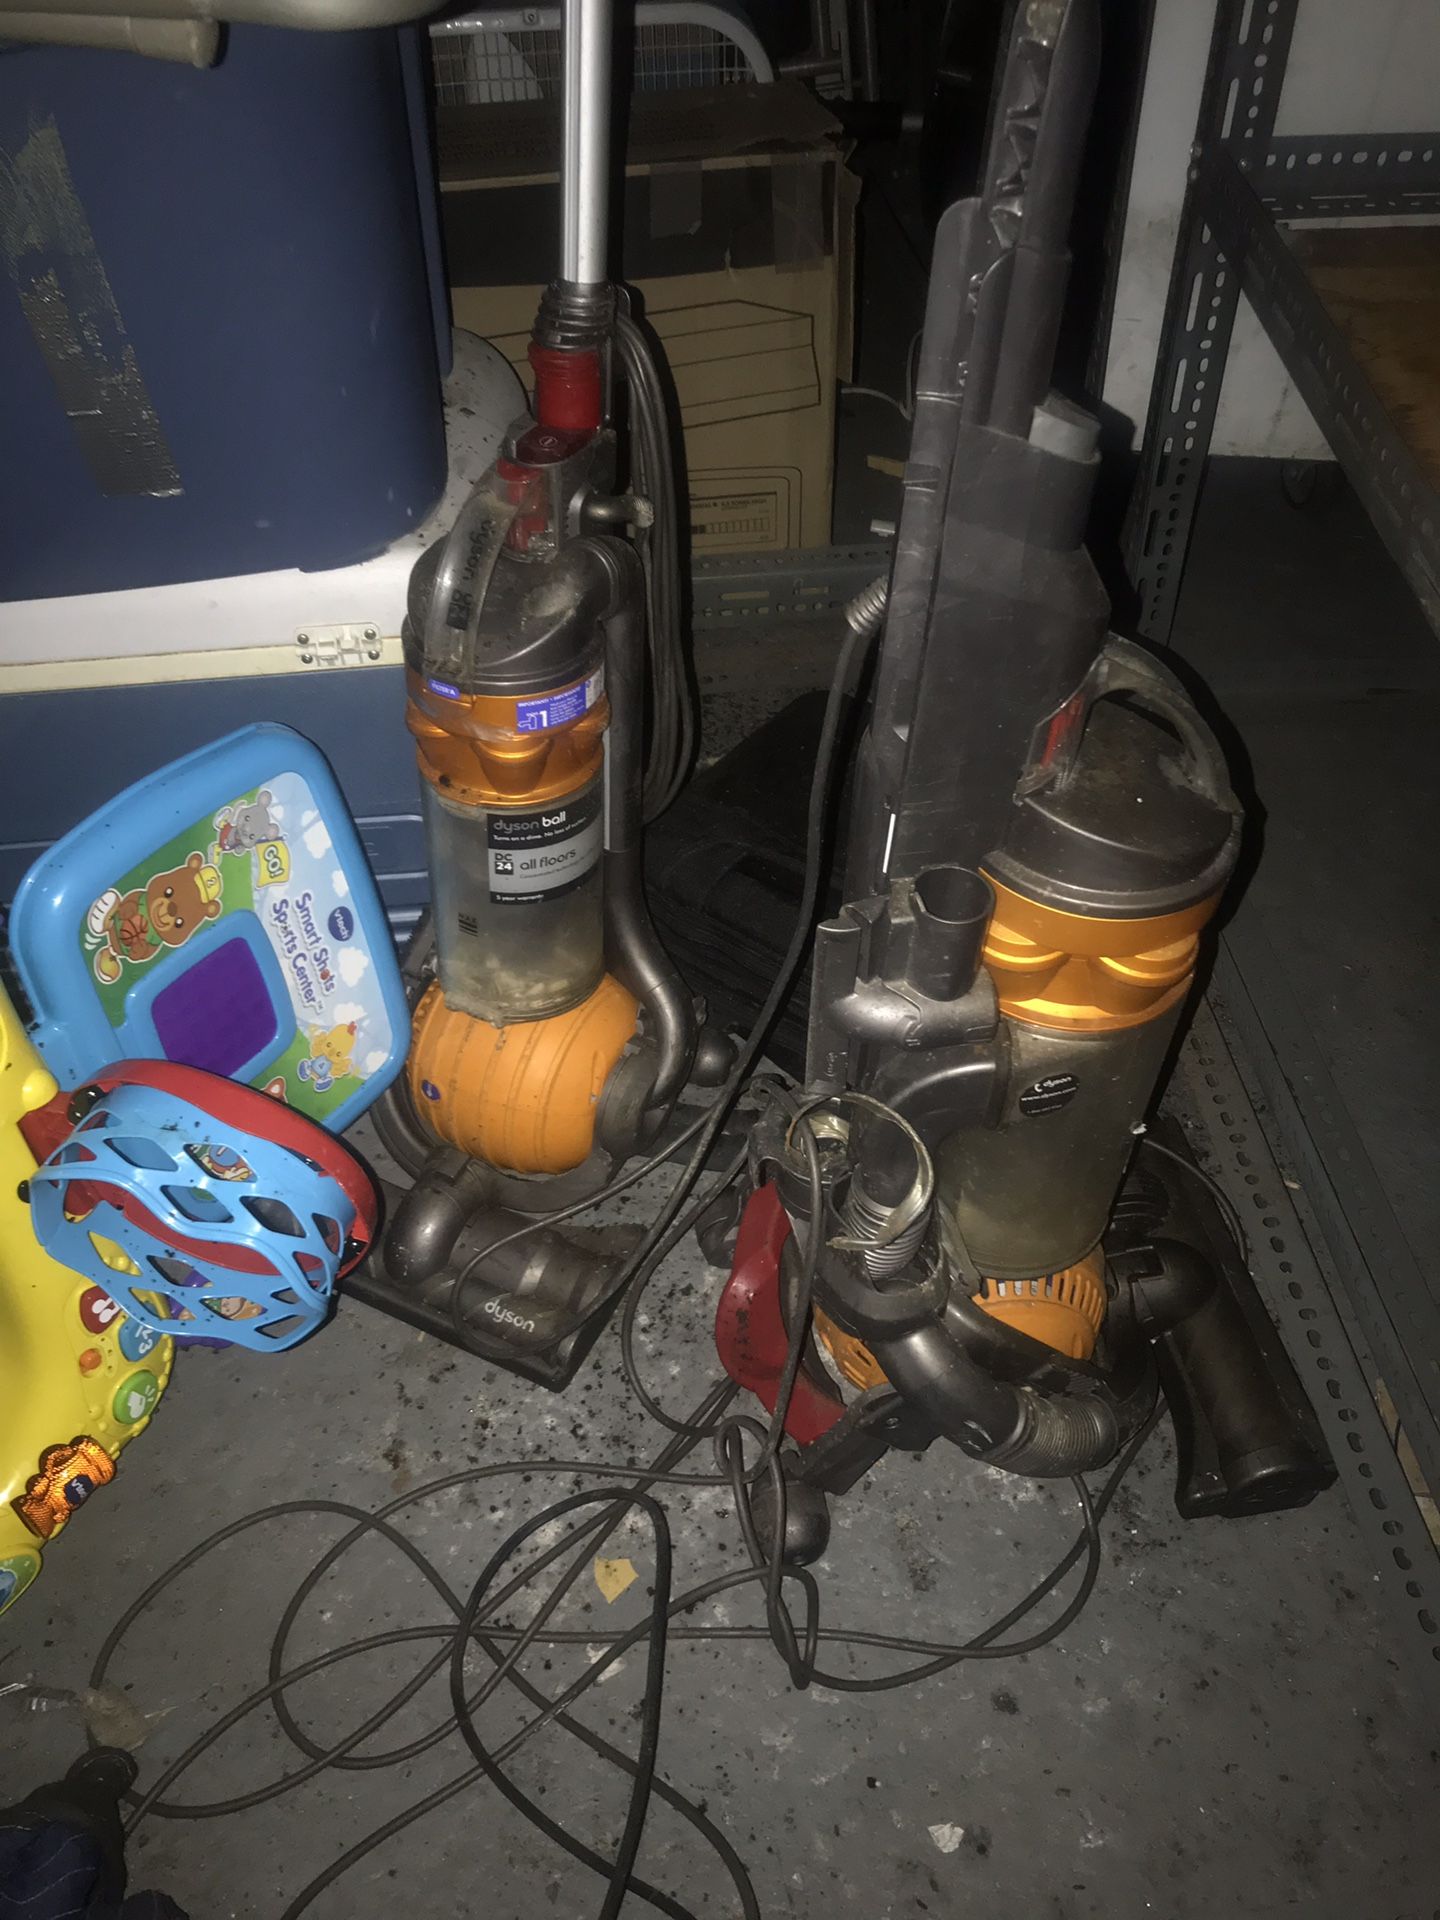 Two dyson dc 24 vacuums for sale, one for parts and one 100% working